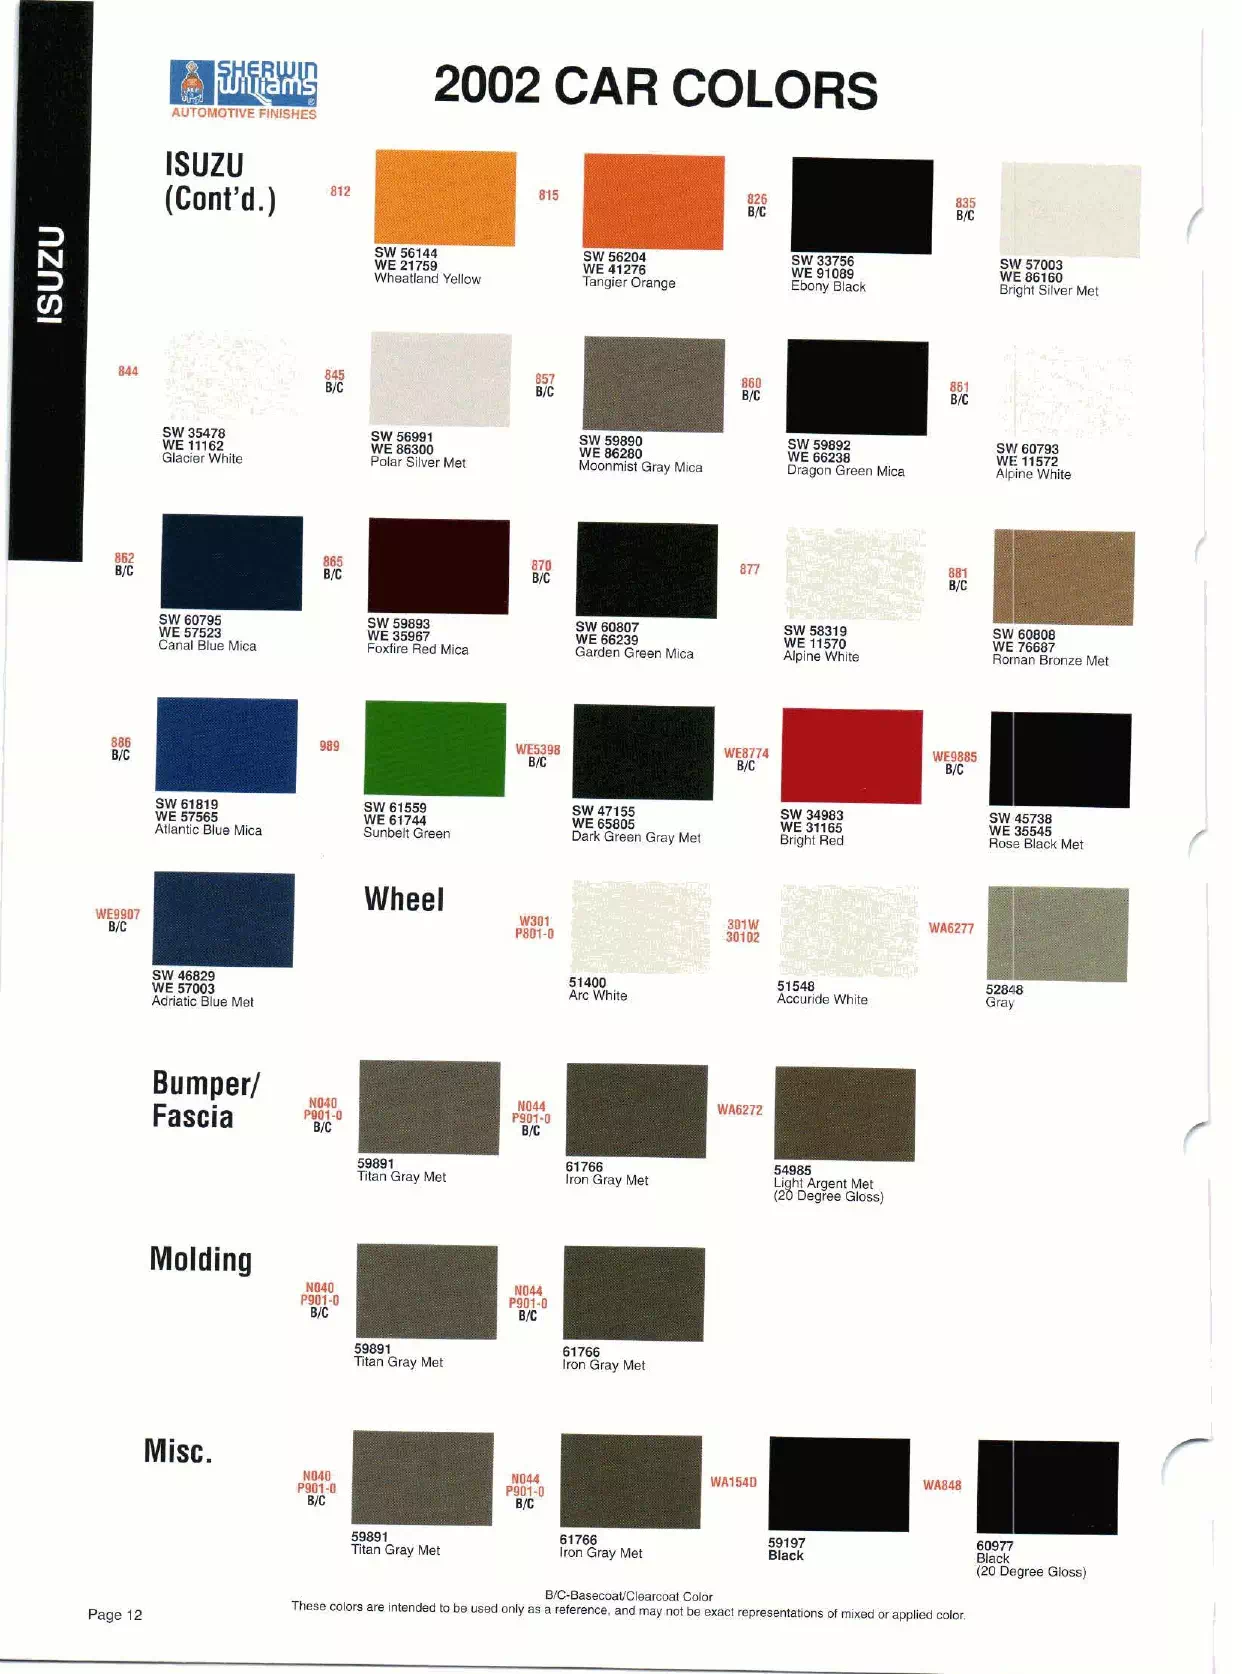 Color swatches, and their ordering paint codes for 2002 model vehicles